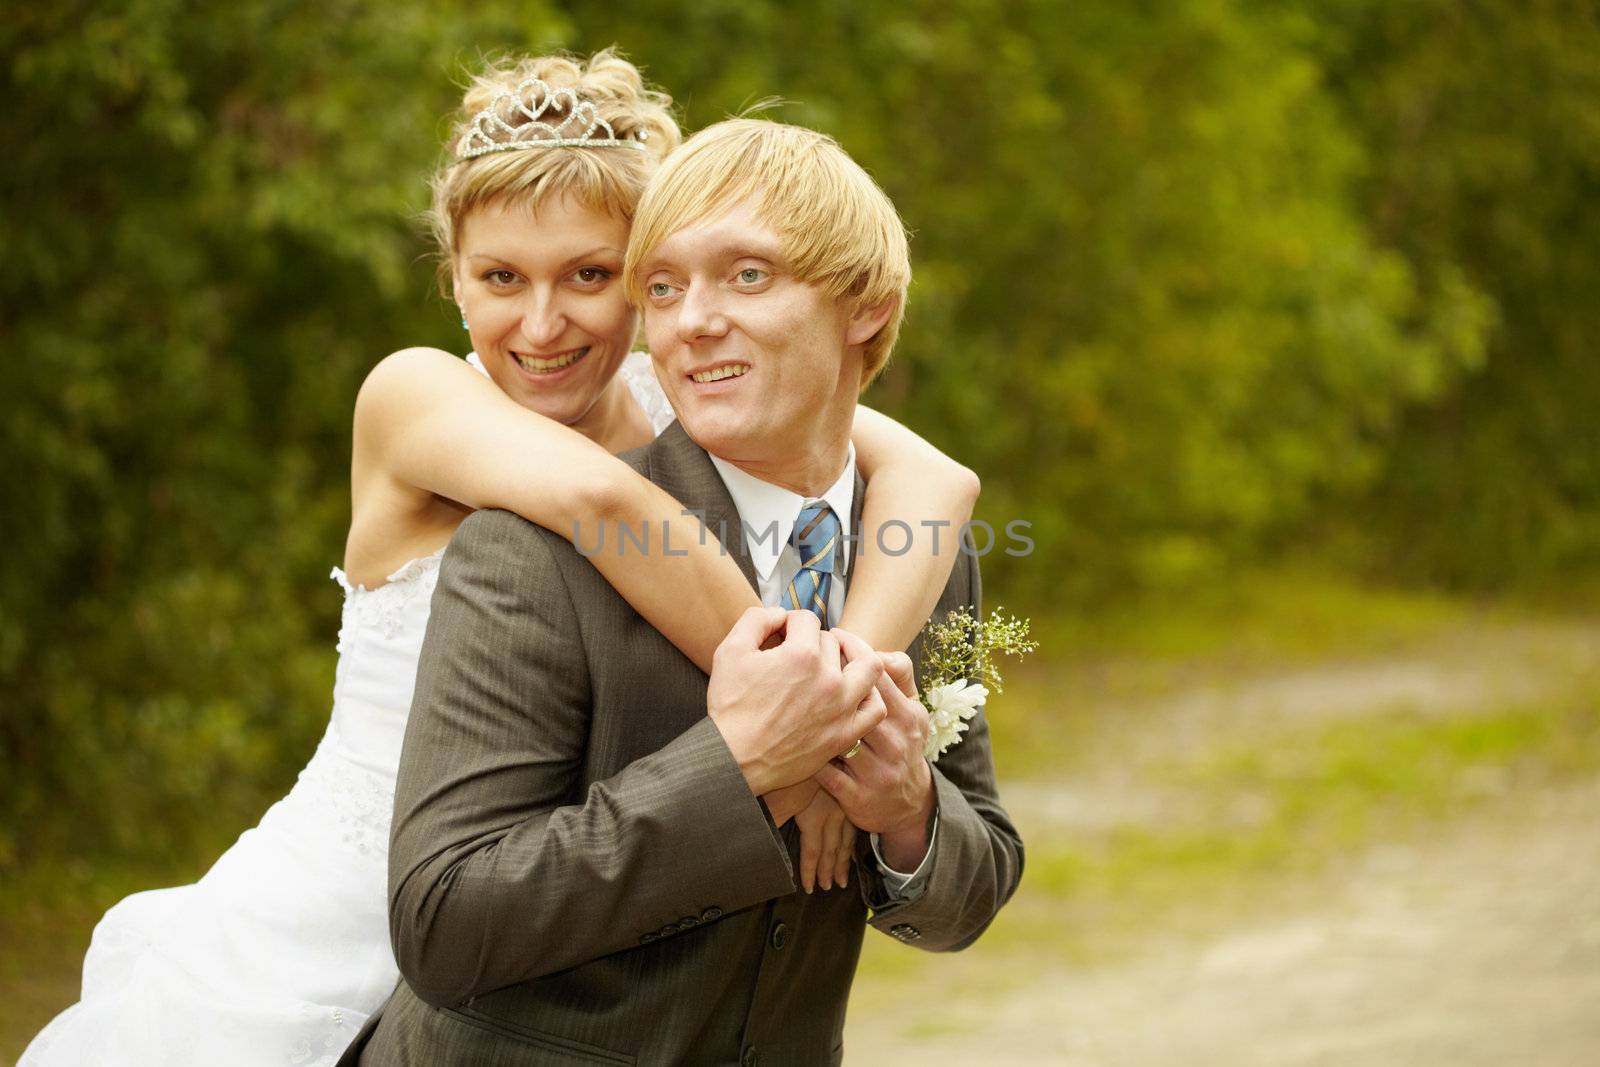 Happy young bride and groom hugging outdoors